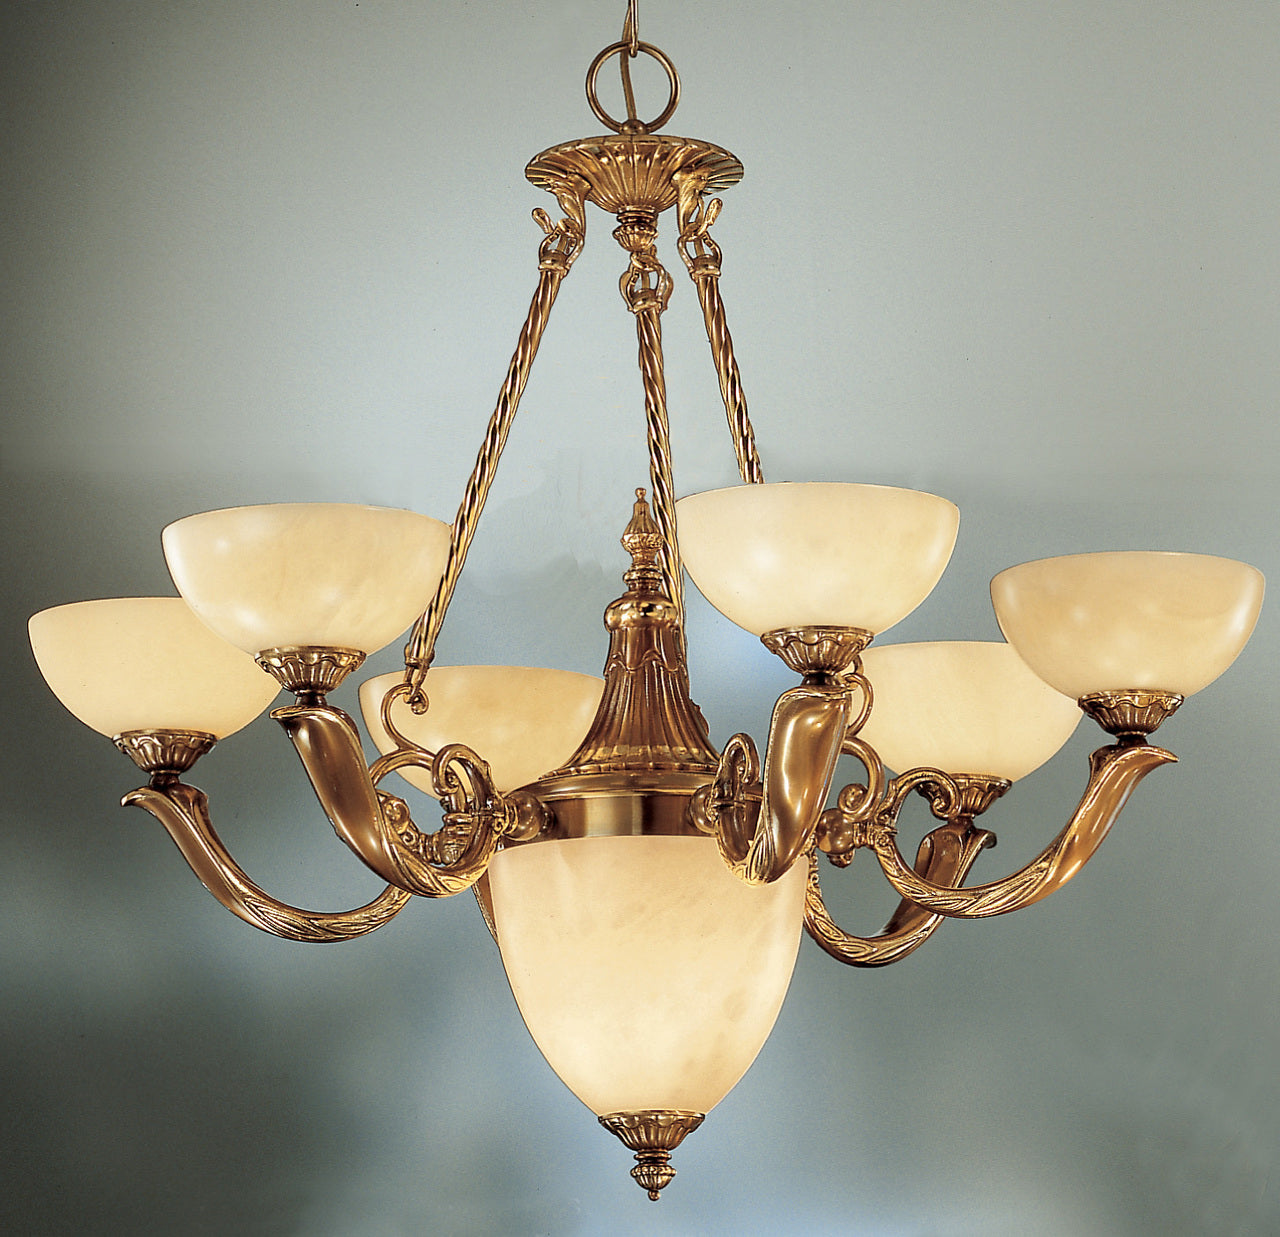 Classic Lighting 5667 ABZ Valencia Alabaster Chandelier in Antique Bronze (Imported from Spain)